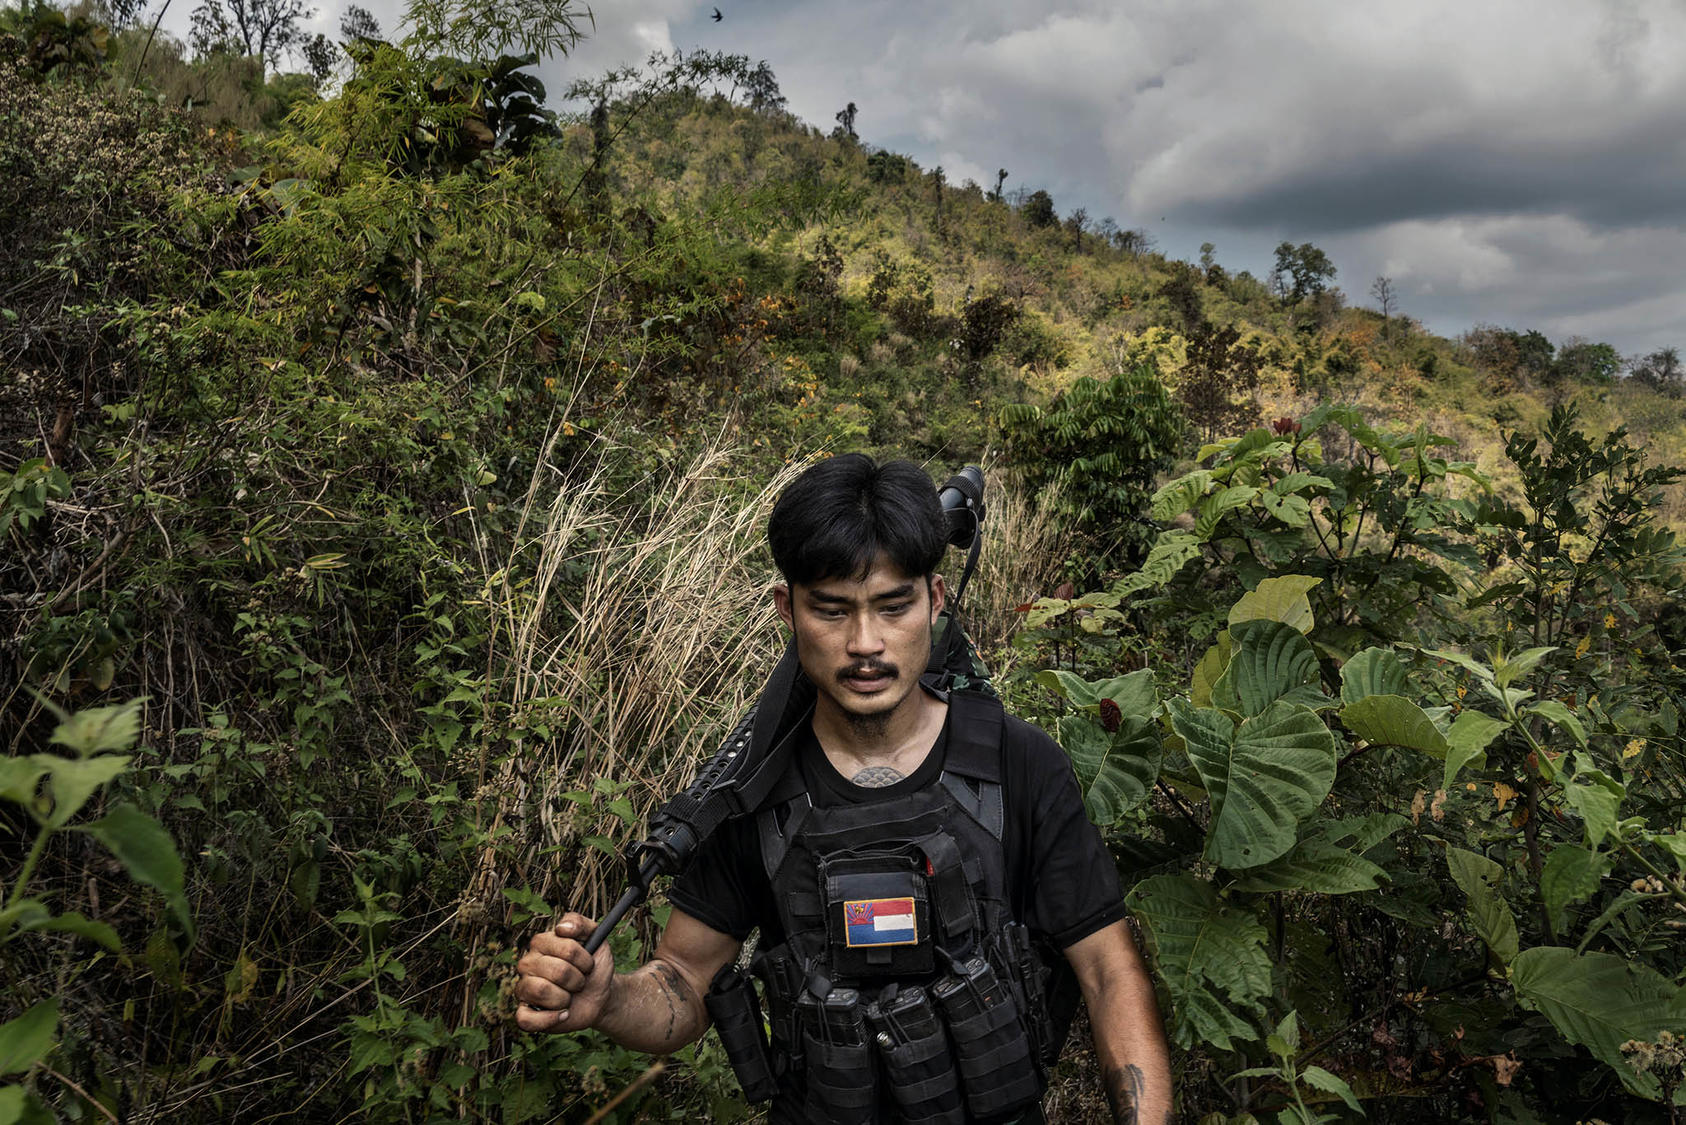 A member of an ethnic militia patrols a front line area near government military positions in the Kayin State of Myanmar, March 9, 2022. (Adam Dean/The New York Times)